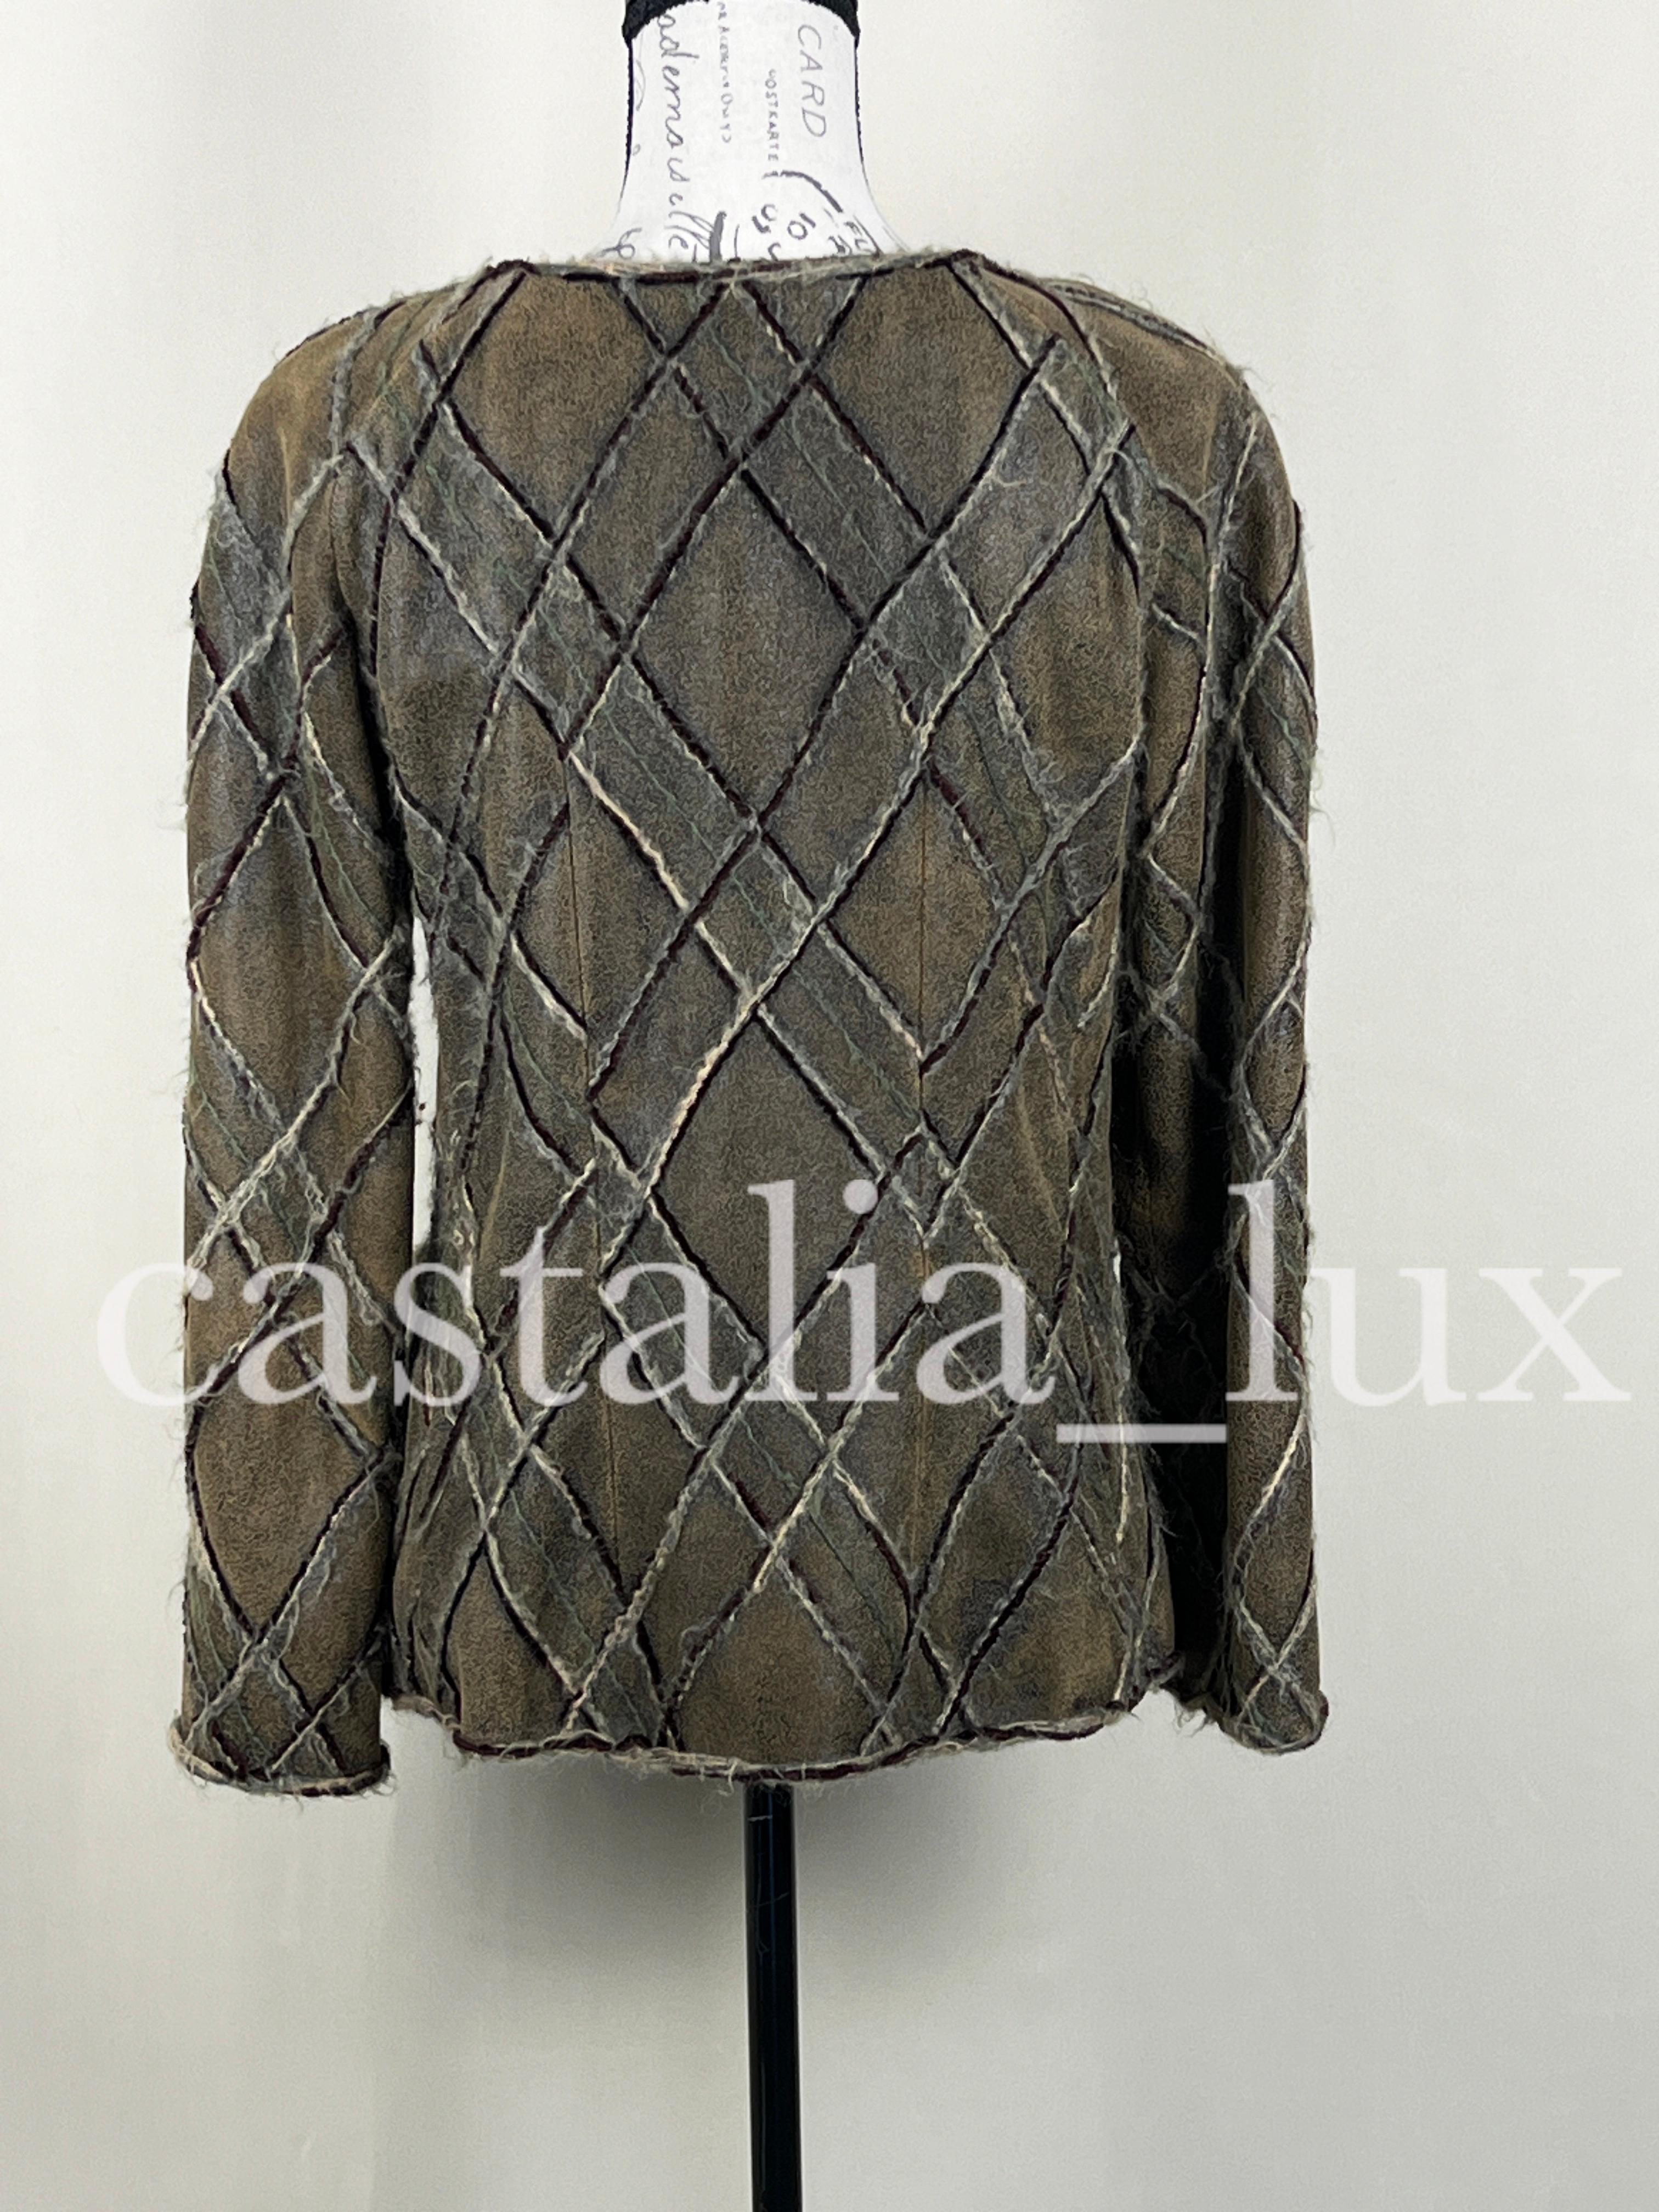 Chanel Extra Rare Paris / Edinburg Quilted Runway Jacket For Sale 8